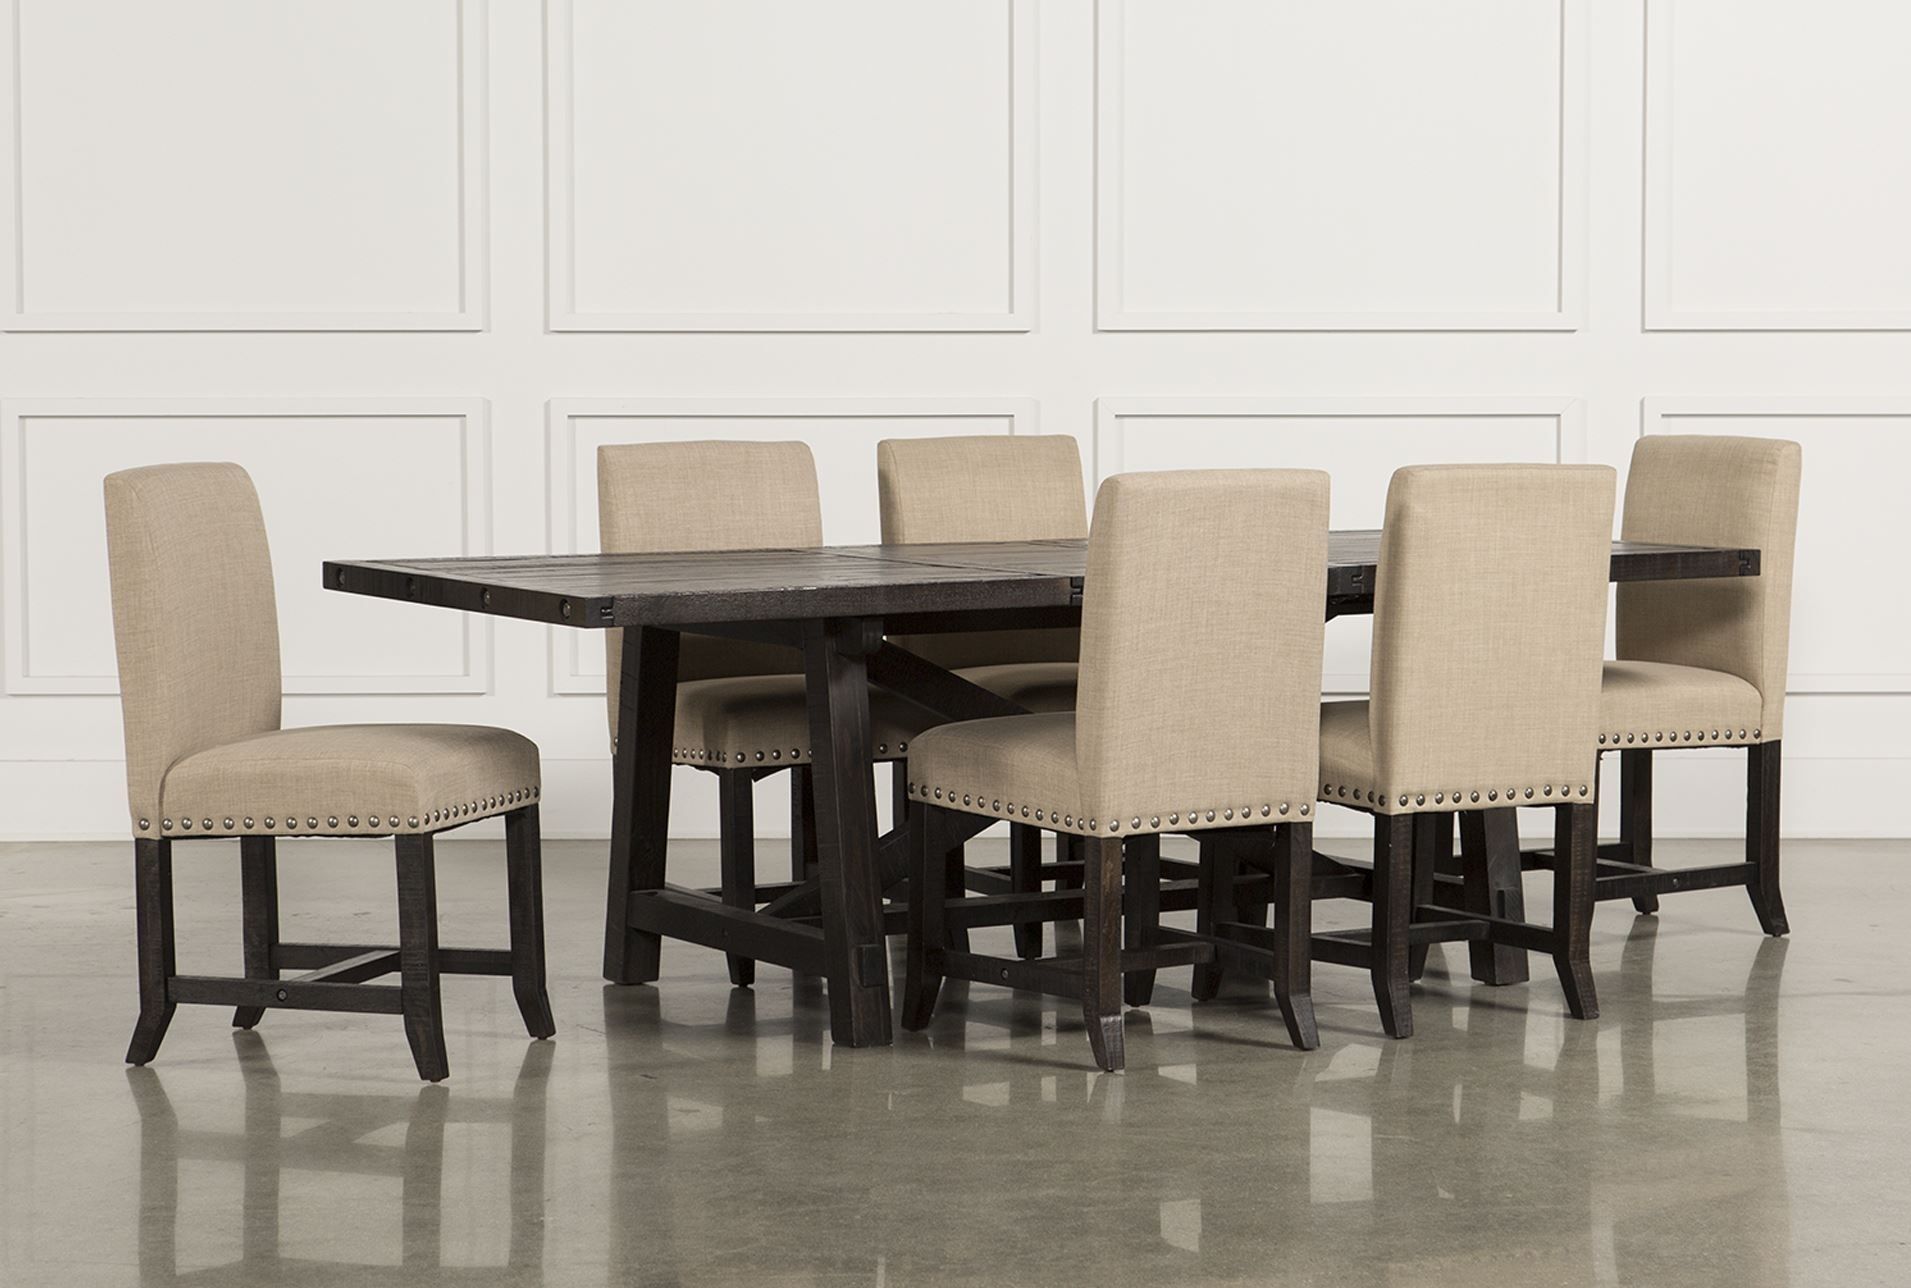 Jaxon 7 Piece Rectangle Dining Set W/upholstered Chairs | For The Pertaining To Best And Newest Palazzo 7 Piece Dining Sets With Mindy Slipcovered Side Chairs (View 6 of 20)